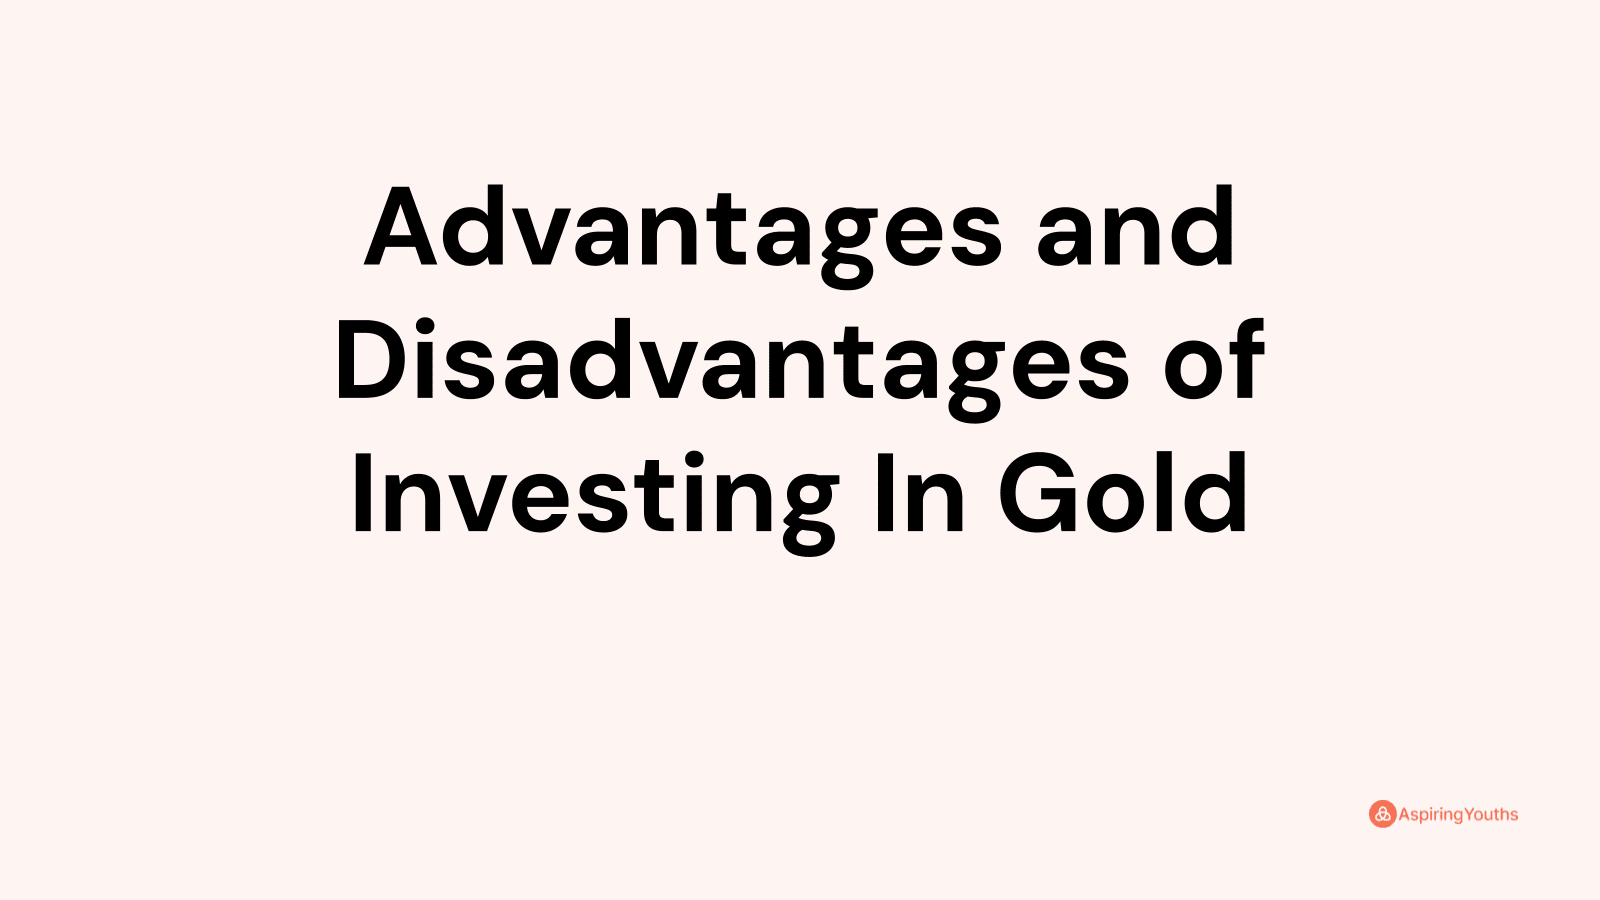 Advantages and disadvantages of Investing In Gold